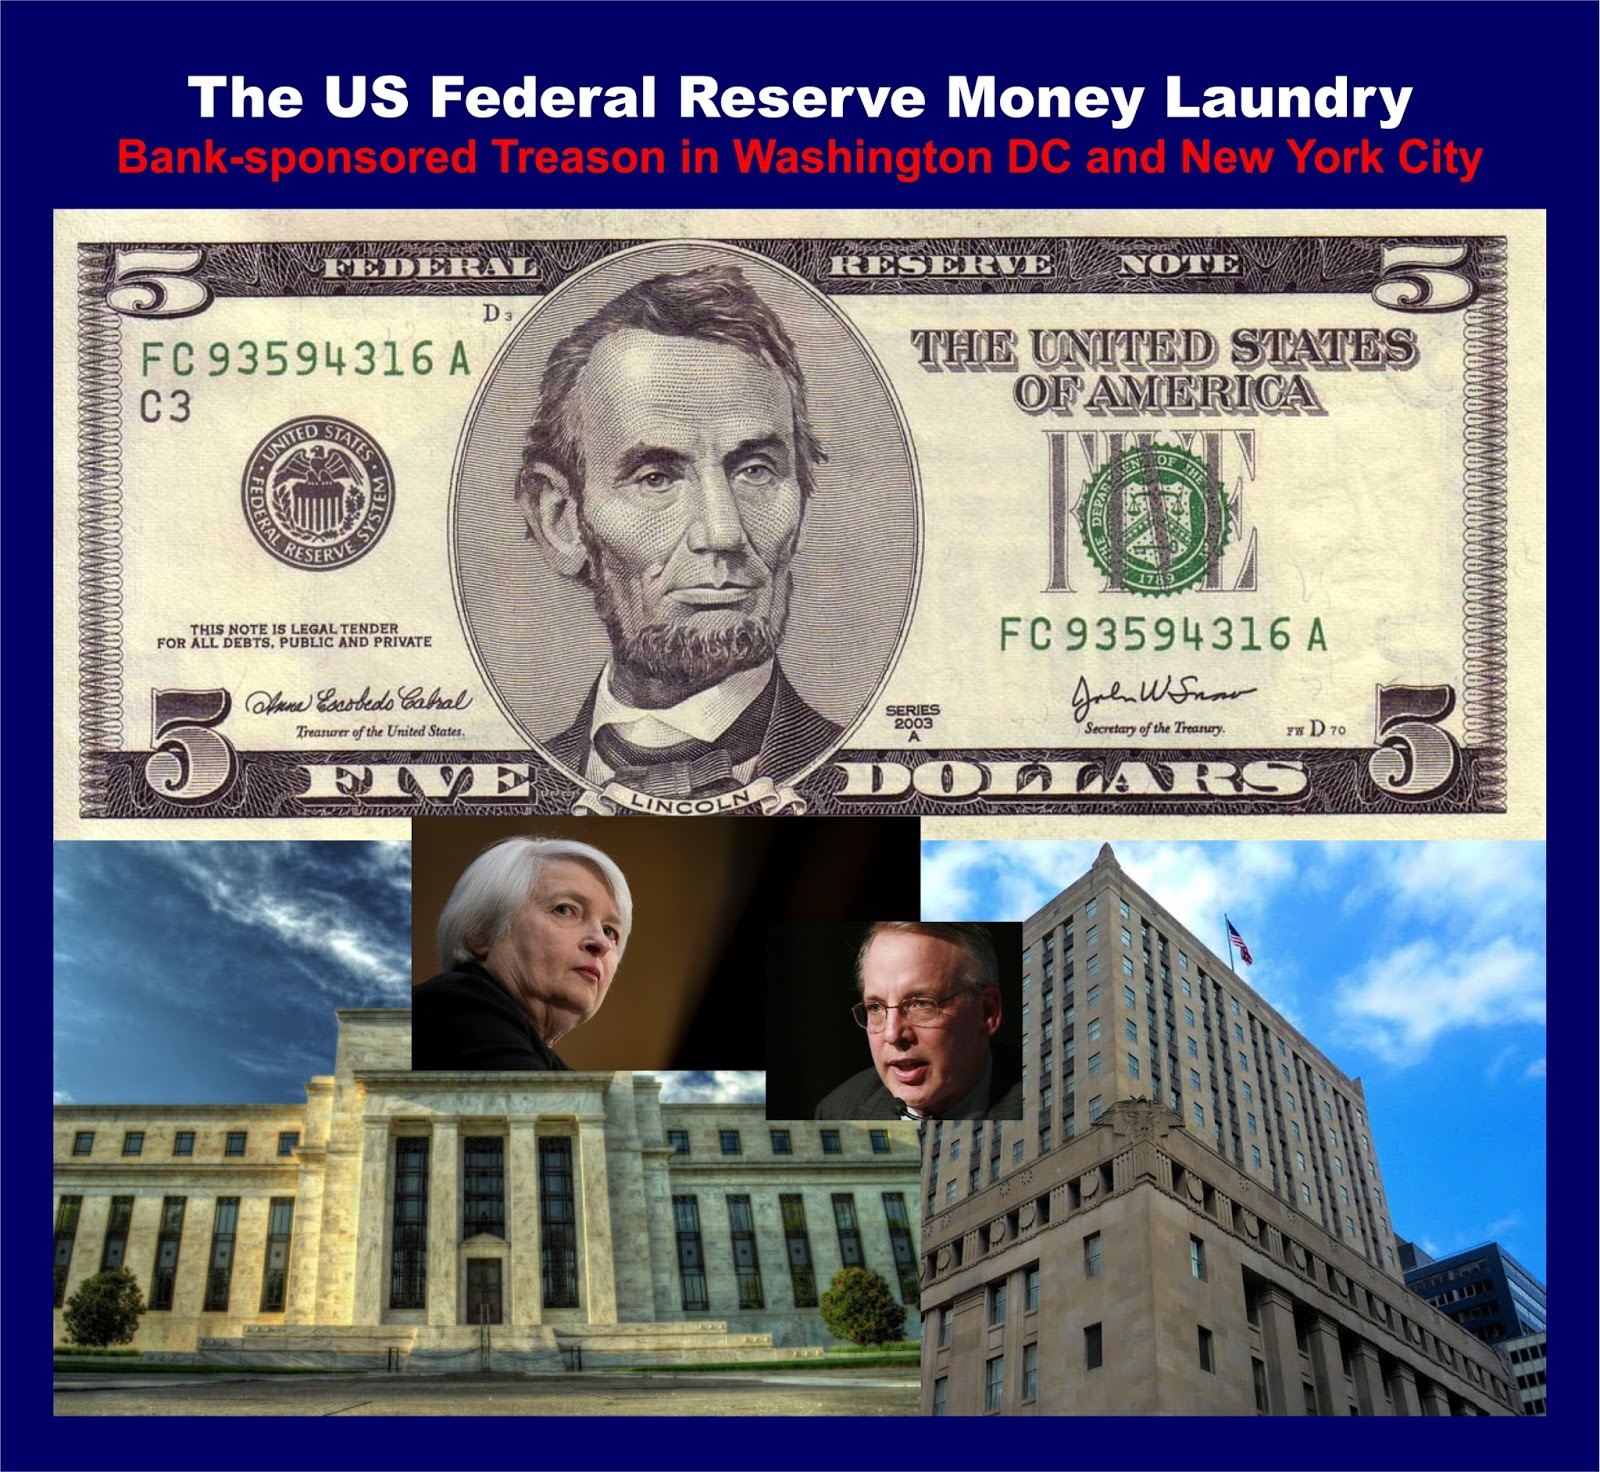  The US Federal Reserve Money Laundry Bank-sponsored Treason in Washington DC and New York City US%2BFederal%2BReserve%2BMoney%2BLaundry.%2BJanet%2BYellen.%2BWilliam%2BDudley.%2B%25231ab